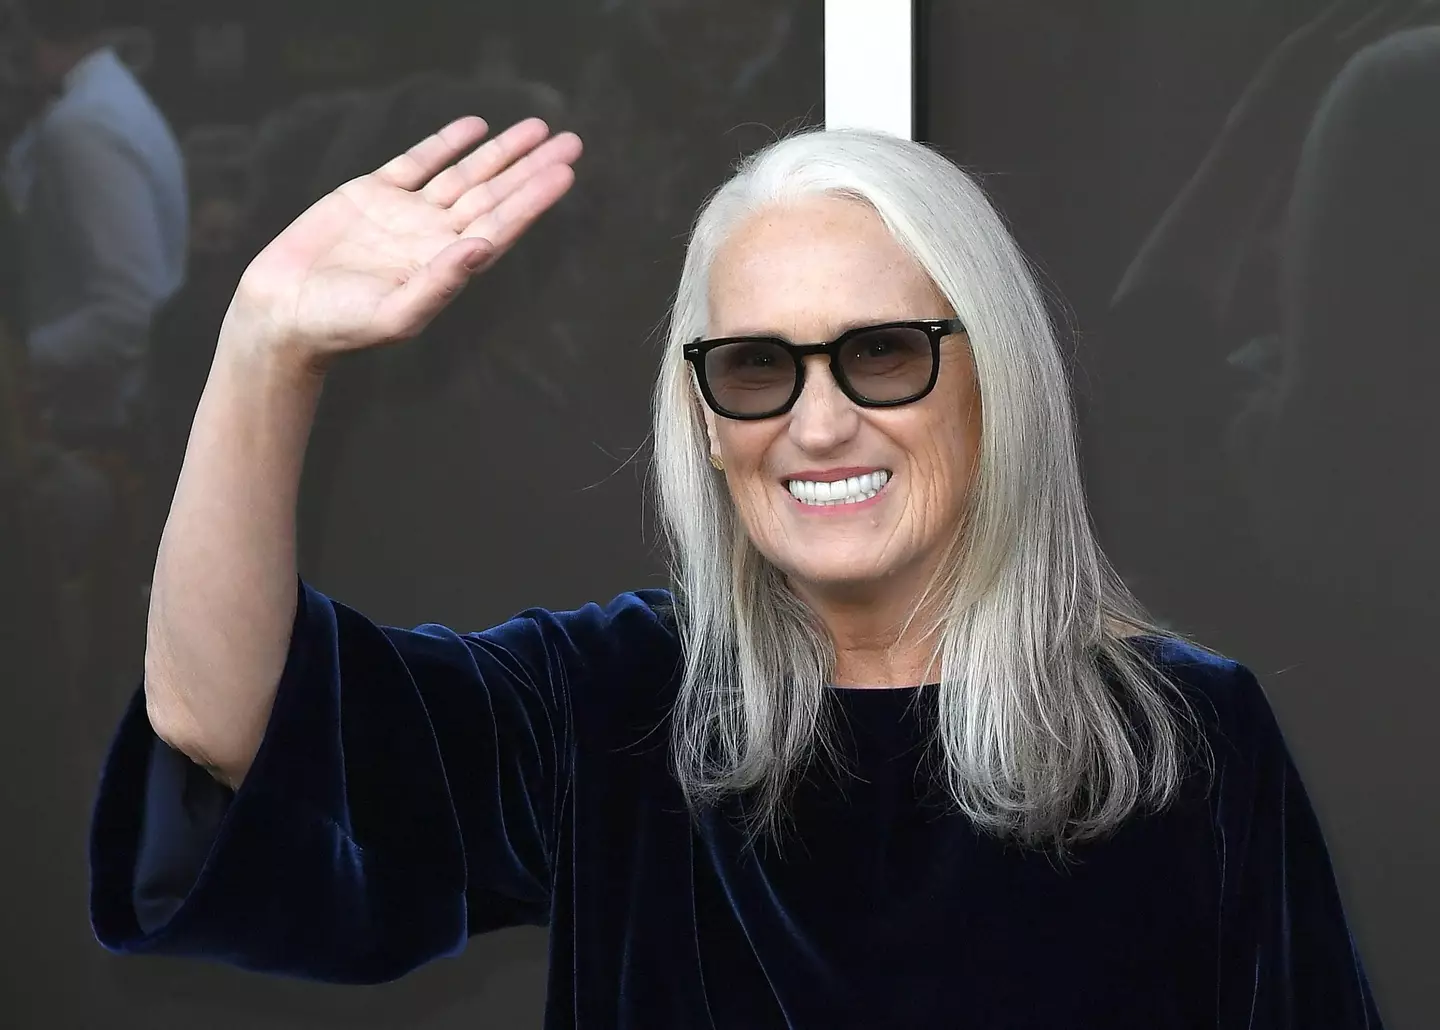 Jane Campion, director of The Power of the Dog.